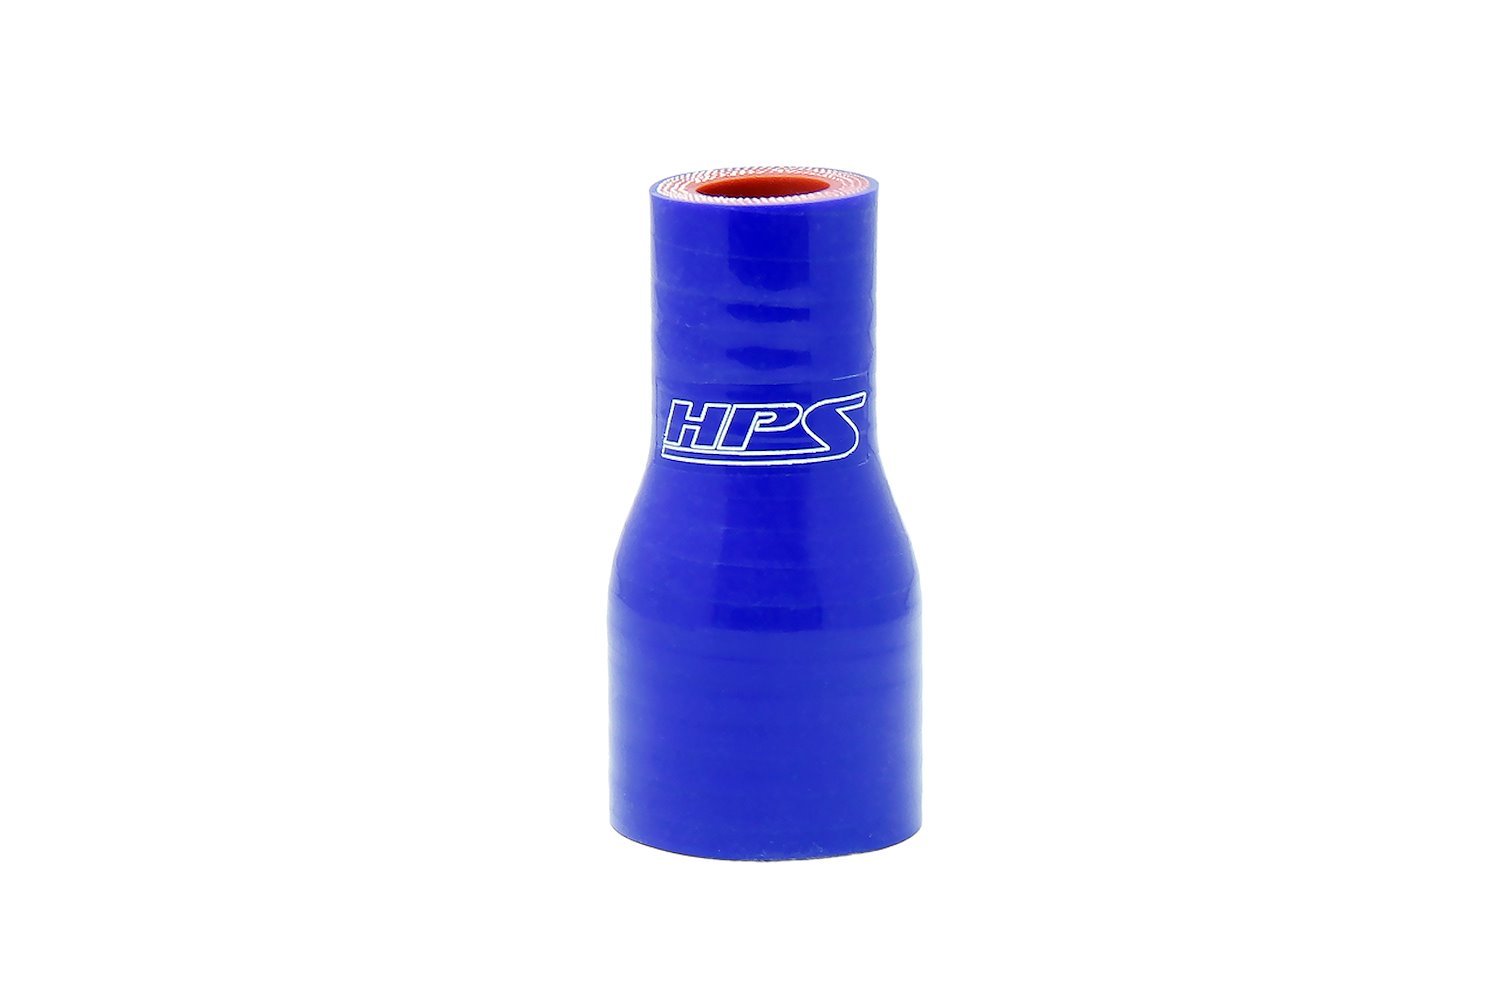 HTSR-112-162-BLUE Silicone Reducer Hose, High-Temp 4-Ply Reinforced, 1-1/8 in. - 1-5/8 in. ID, 3 in. Long, Blue